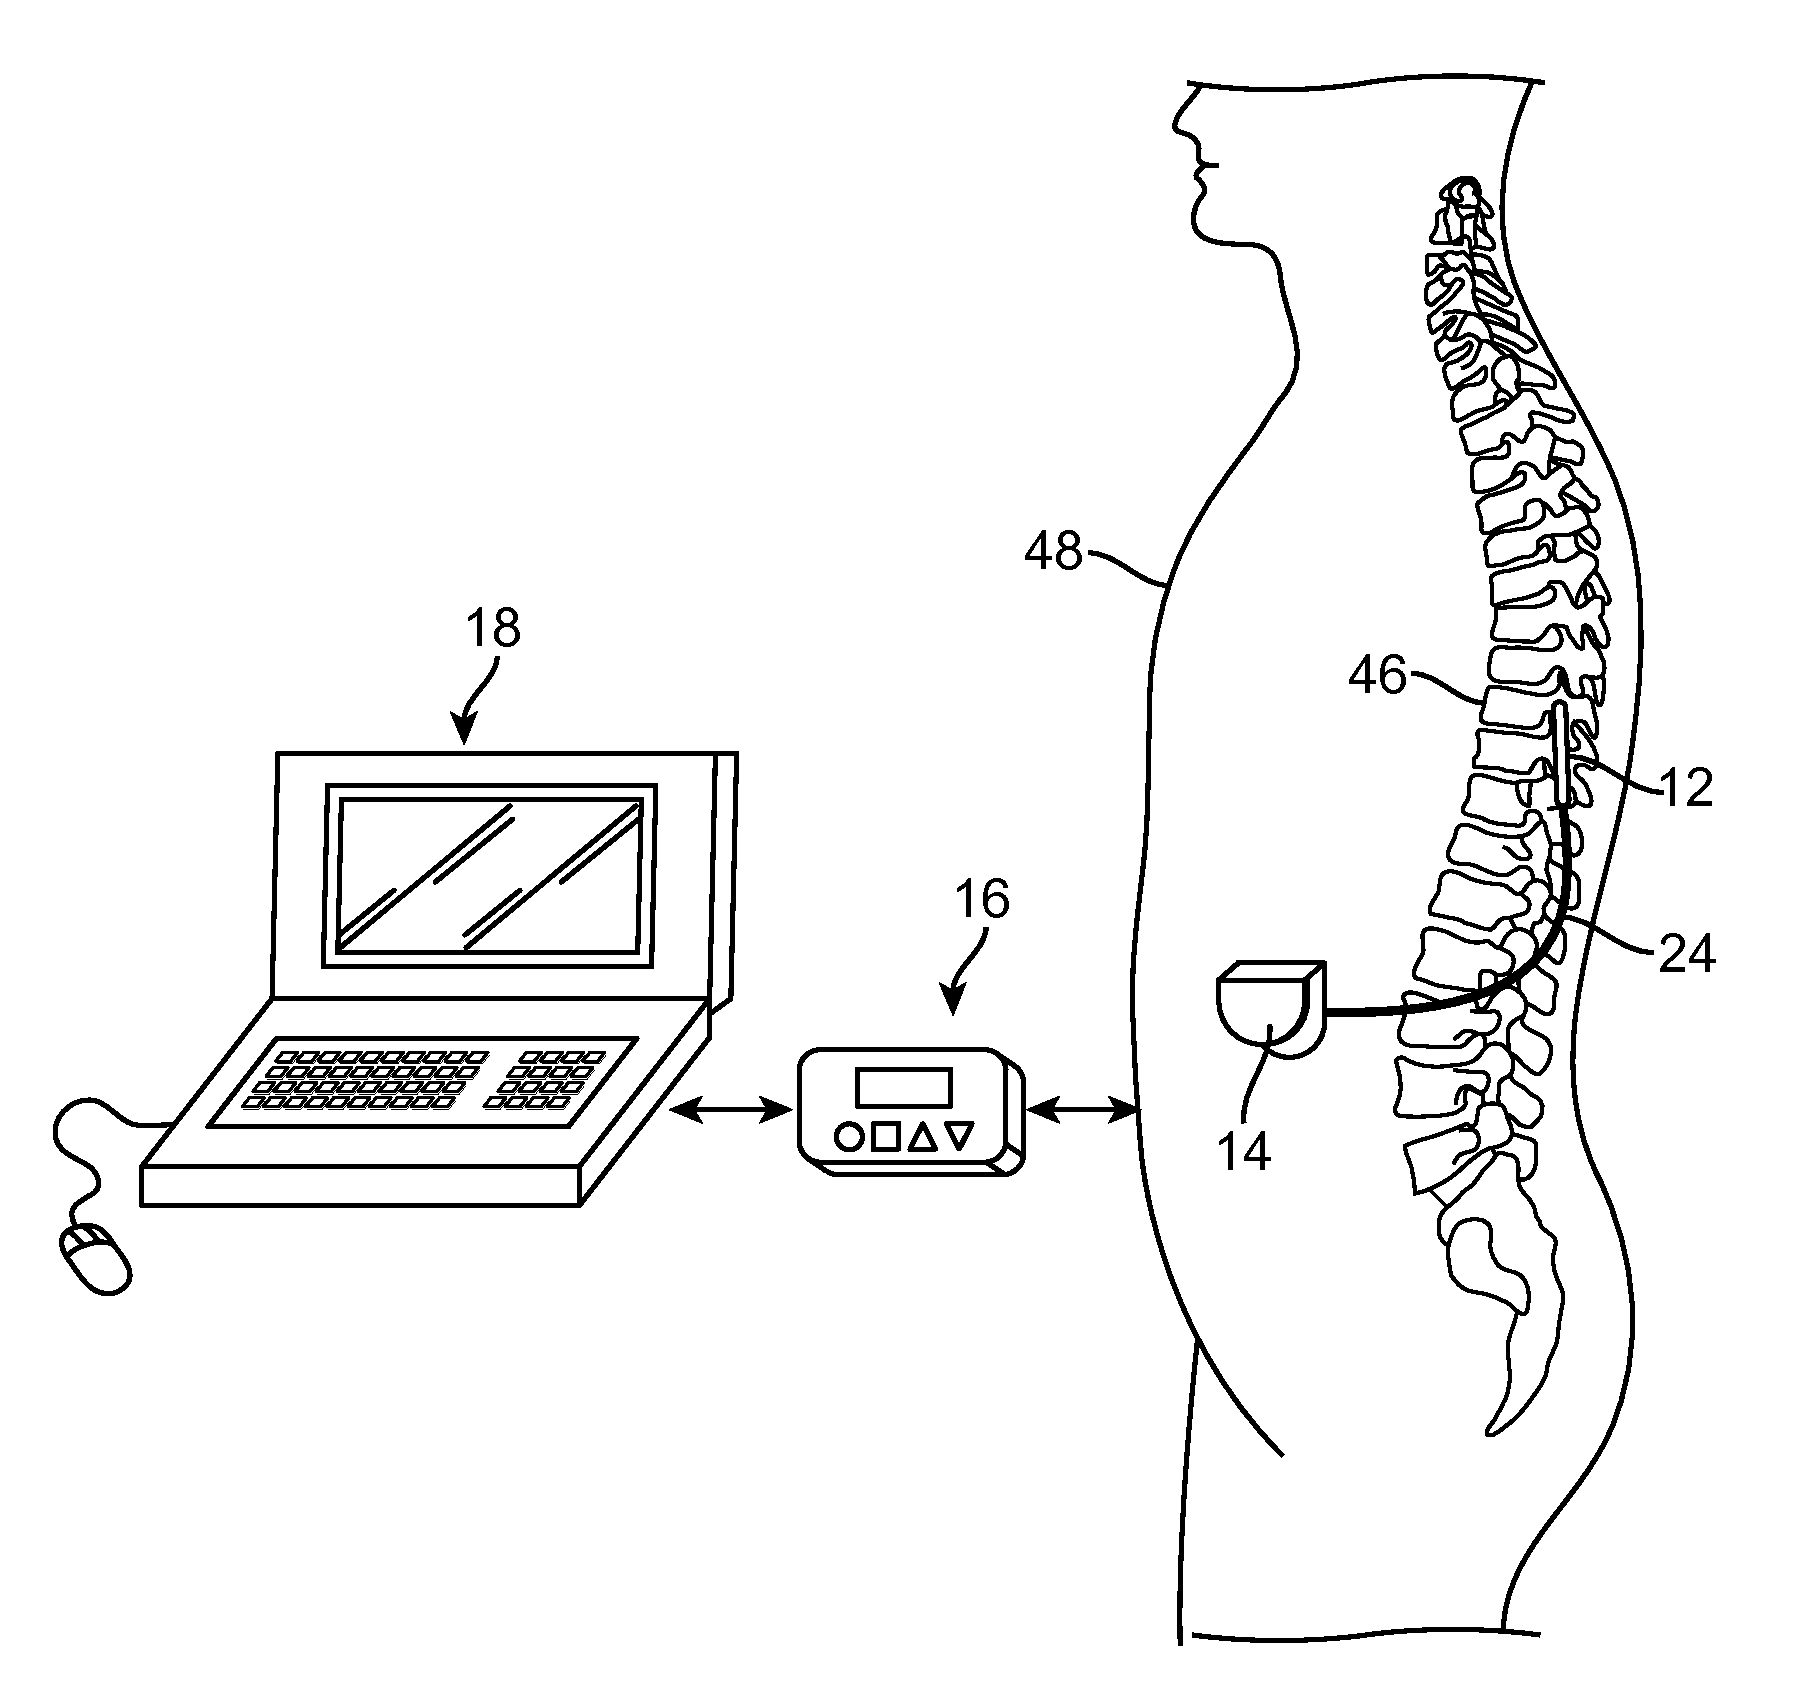 Neuromodulation system and method for reducing energy requirements using feedback